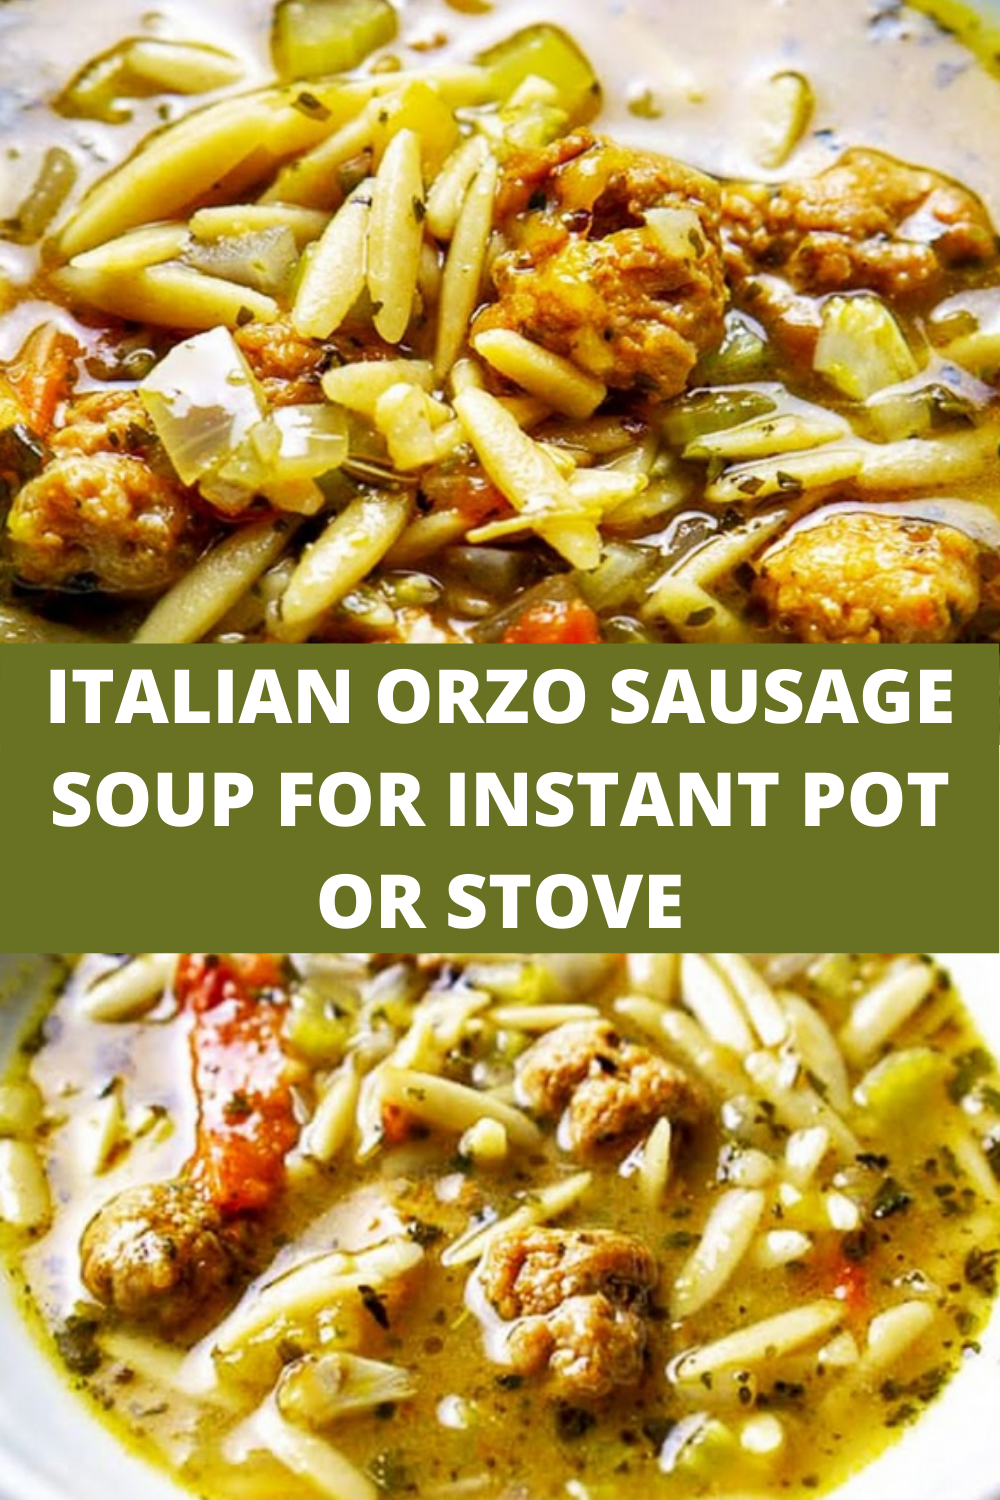 ITALIAN ORZO SAUSAGE SOUP FOR INSTANT POT OR STOVE - Recipes Easy